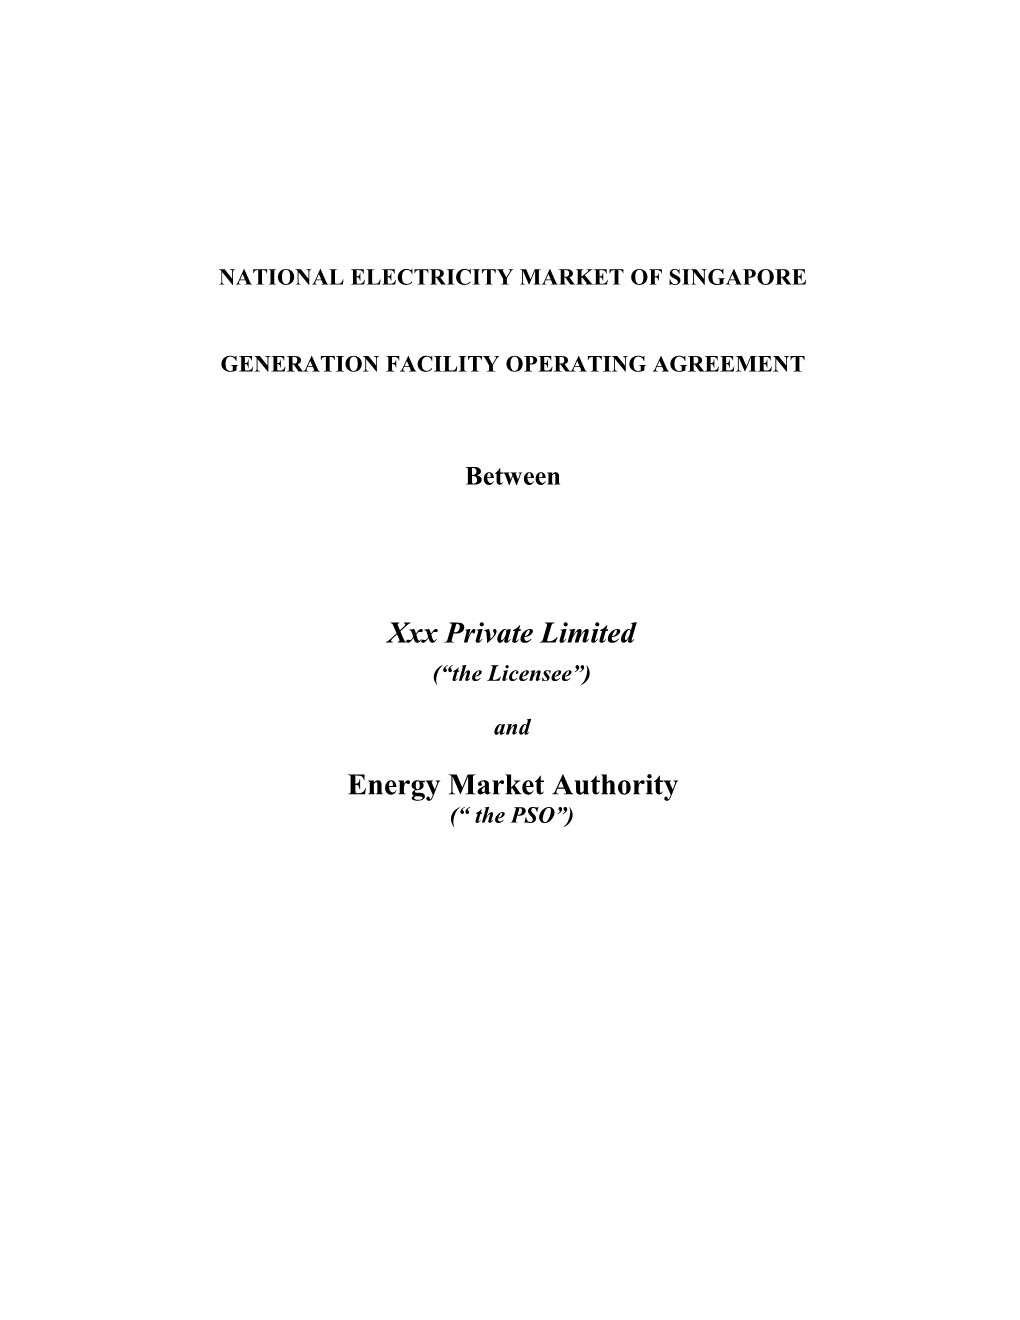 GENERATION FACILITY Operating Agreement